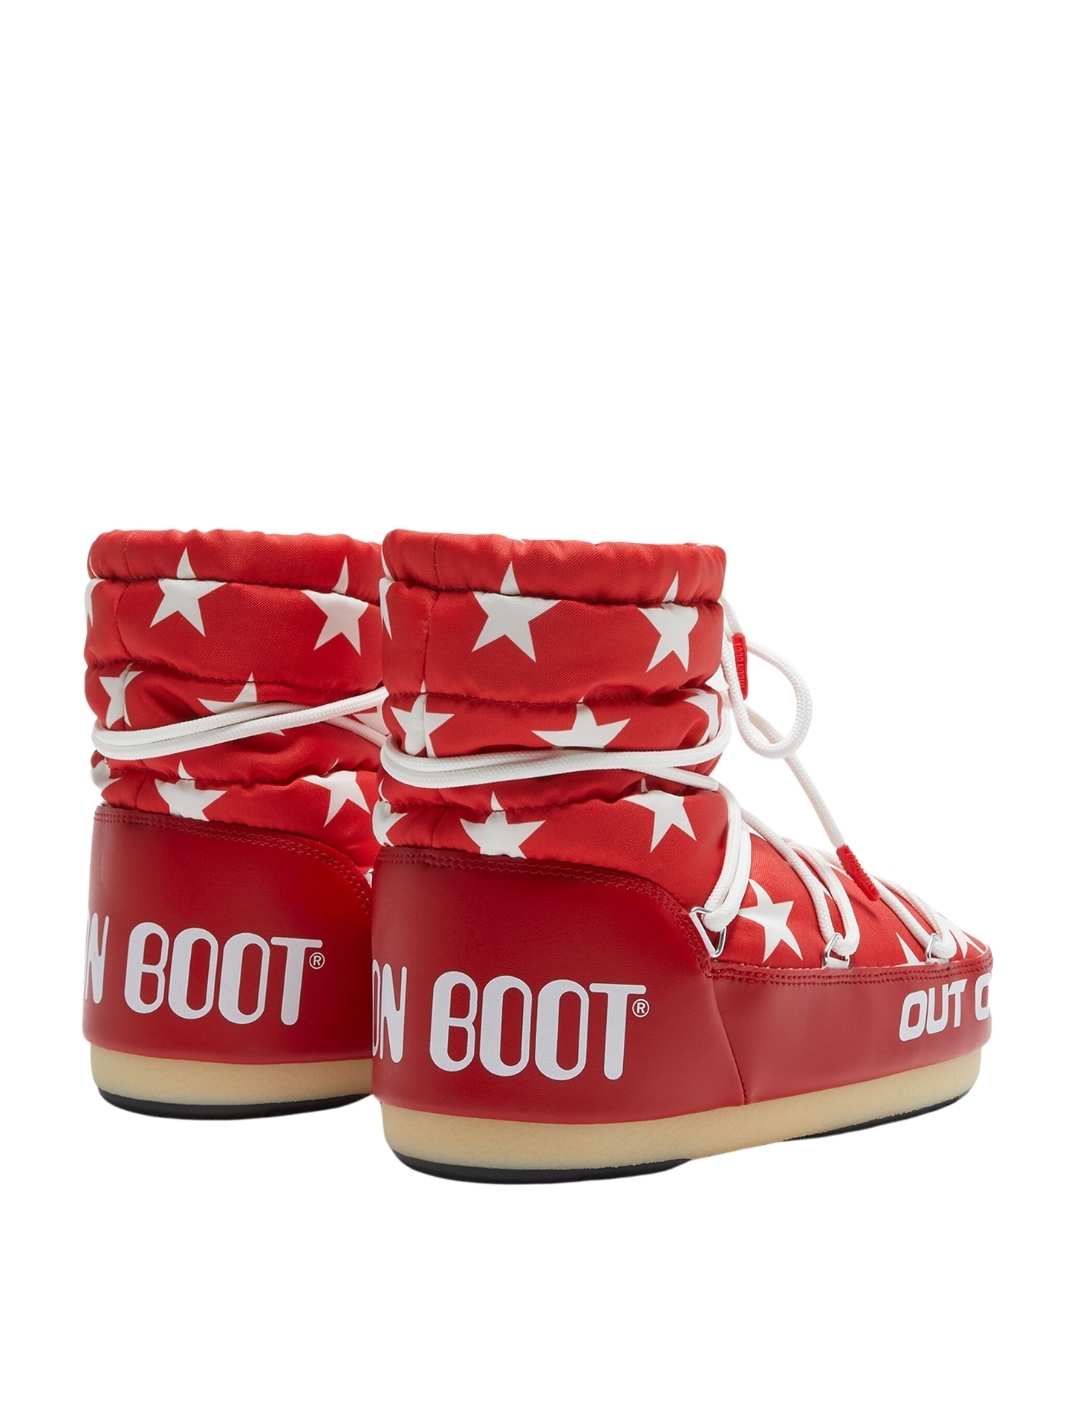 Moon Boot Shoes Boots | MB Light Low Stars Red White